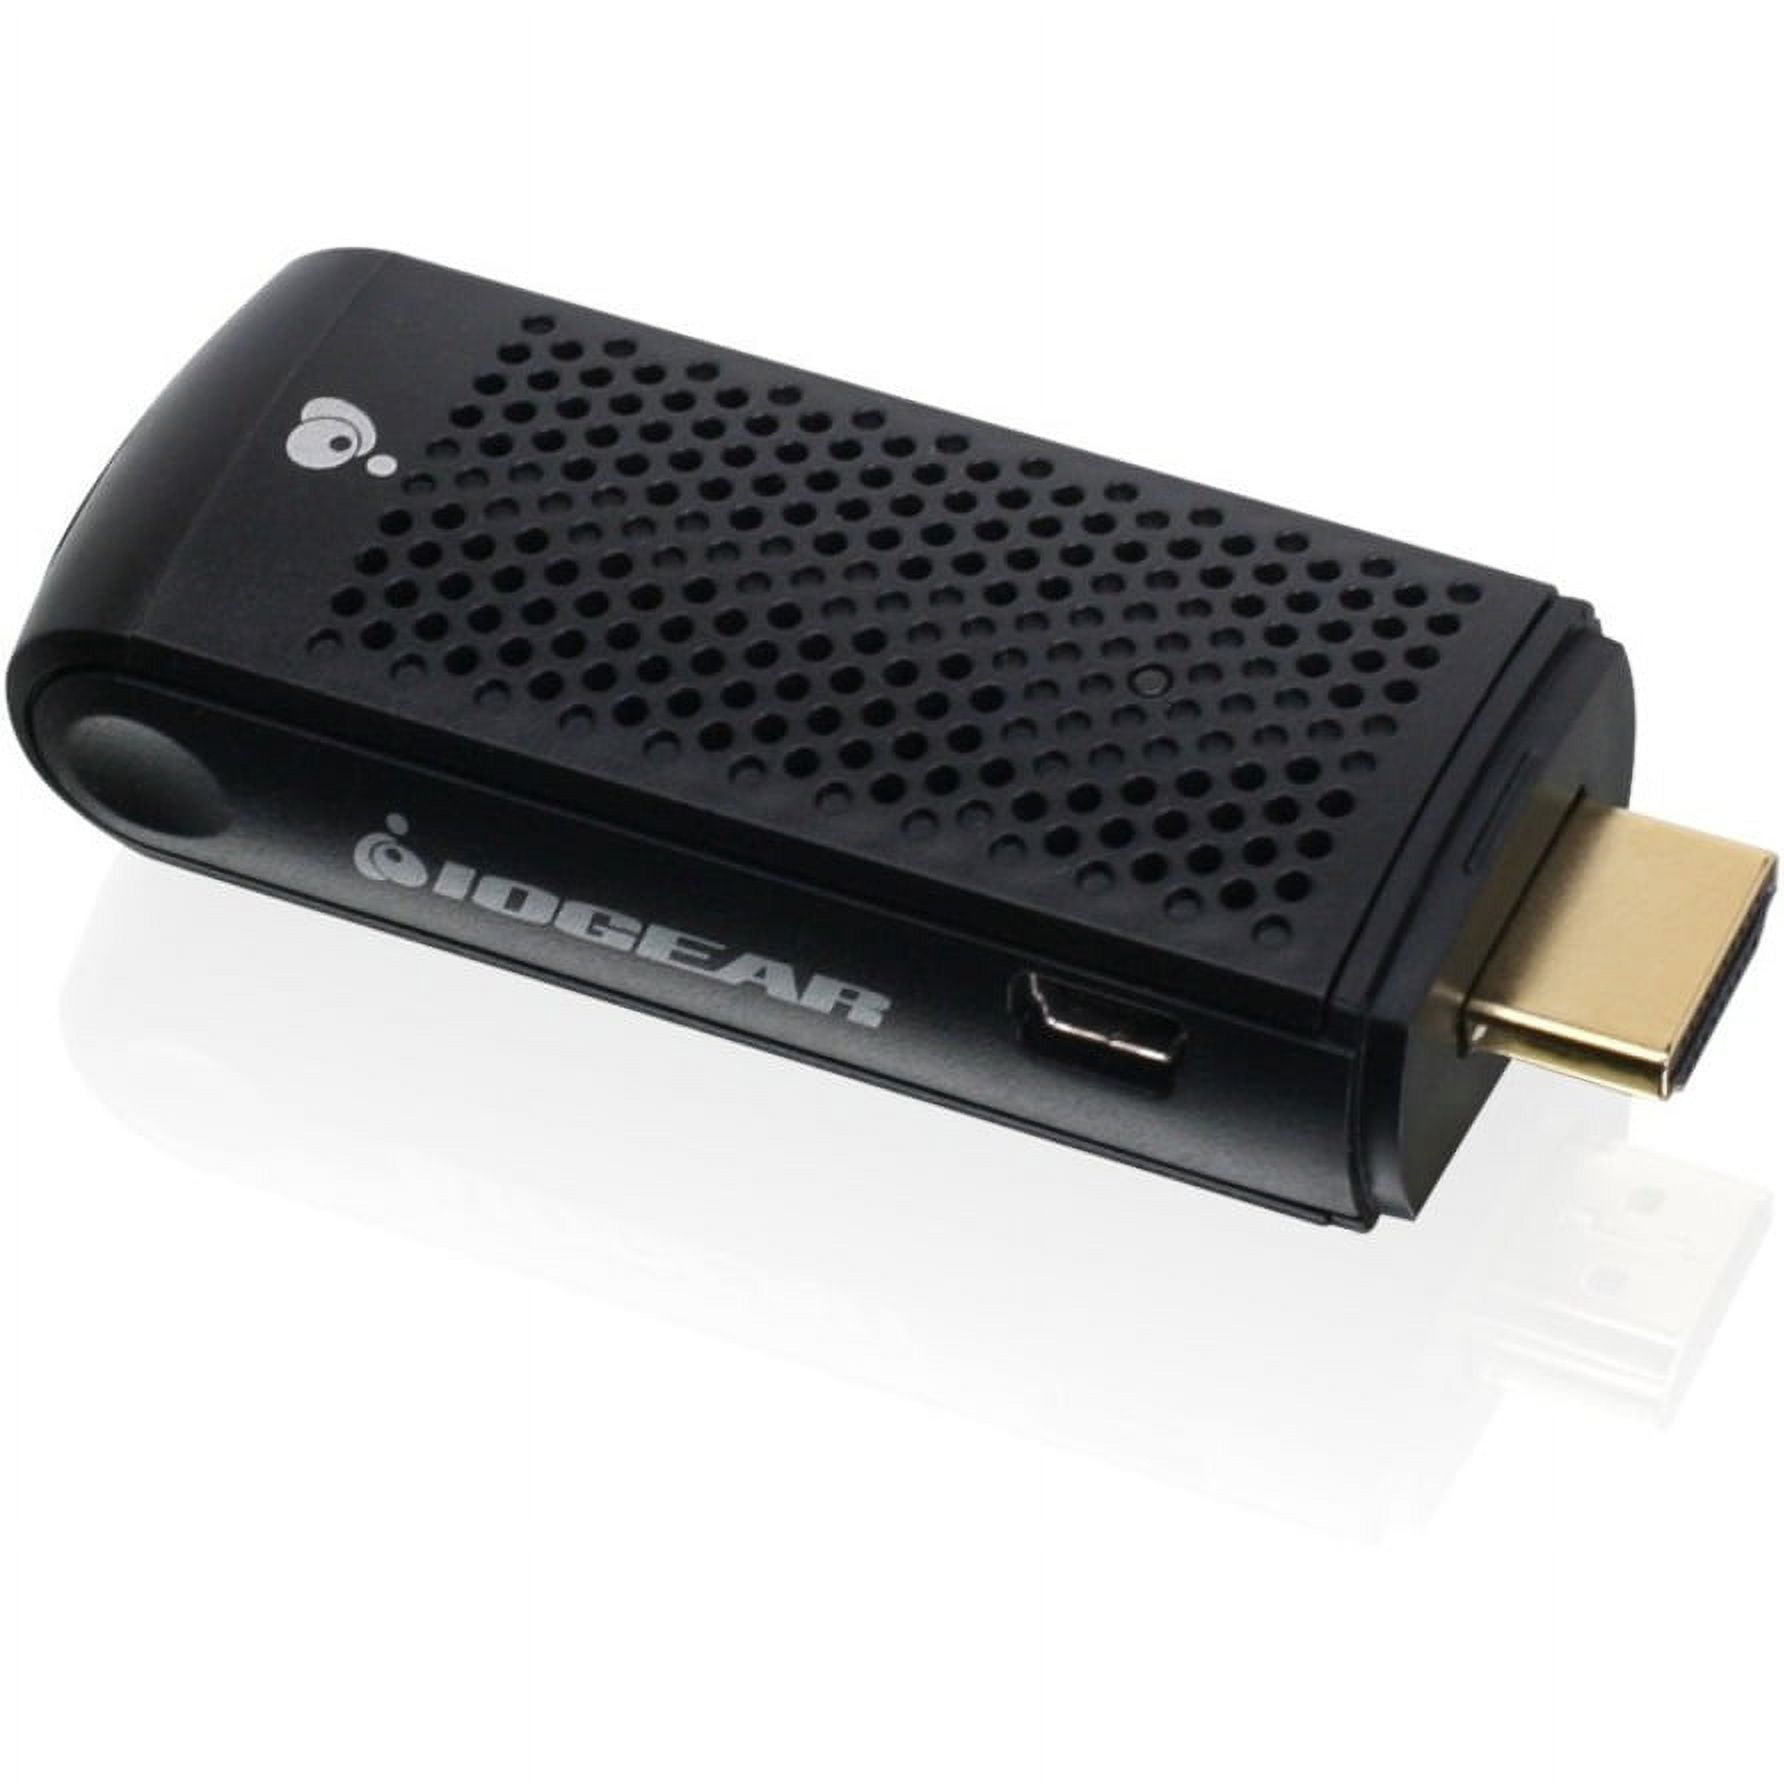 IOGear Wireless HDMI Transmitter and Receiver Kit - Micro Center